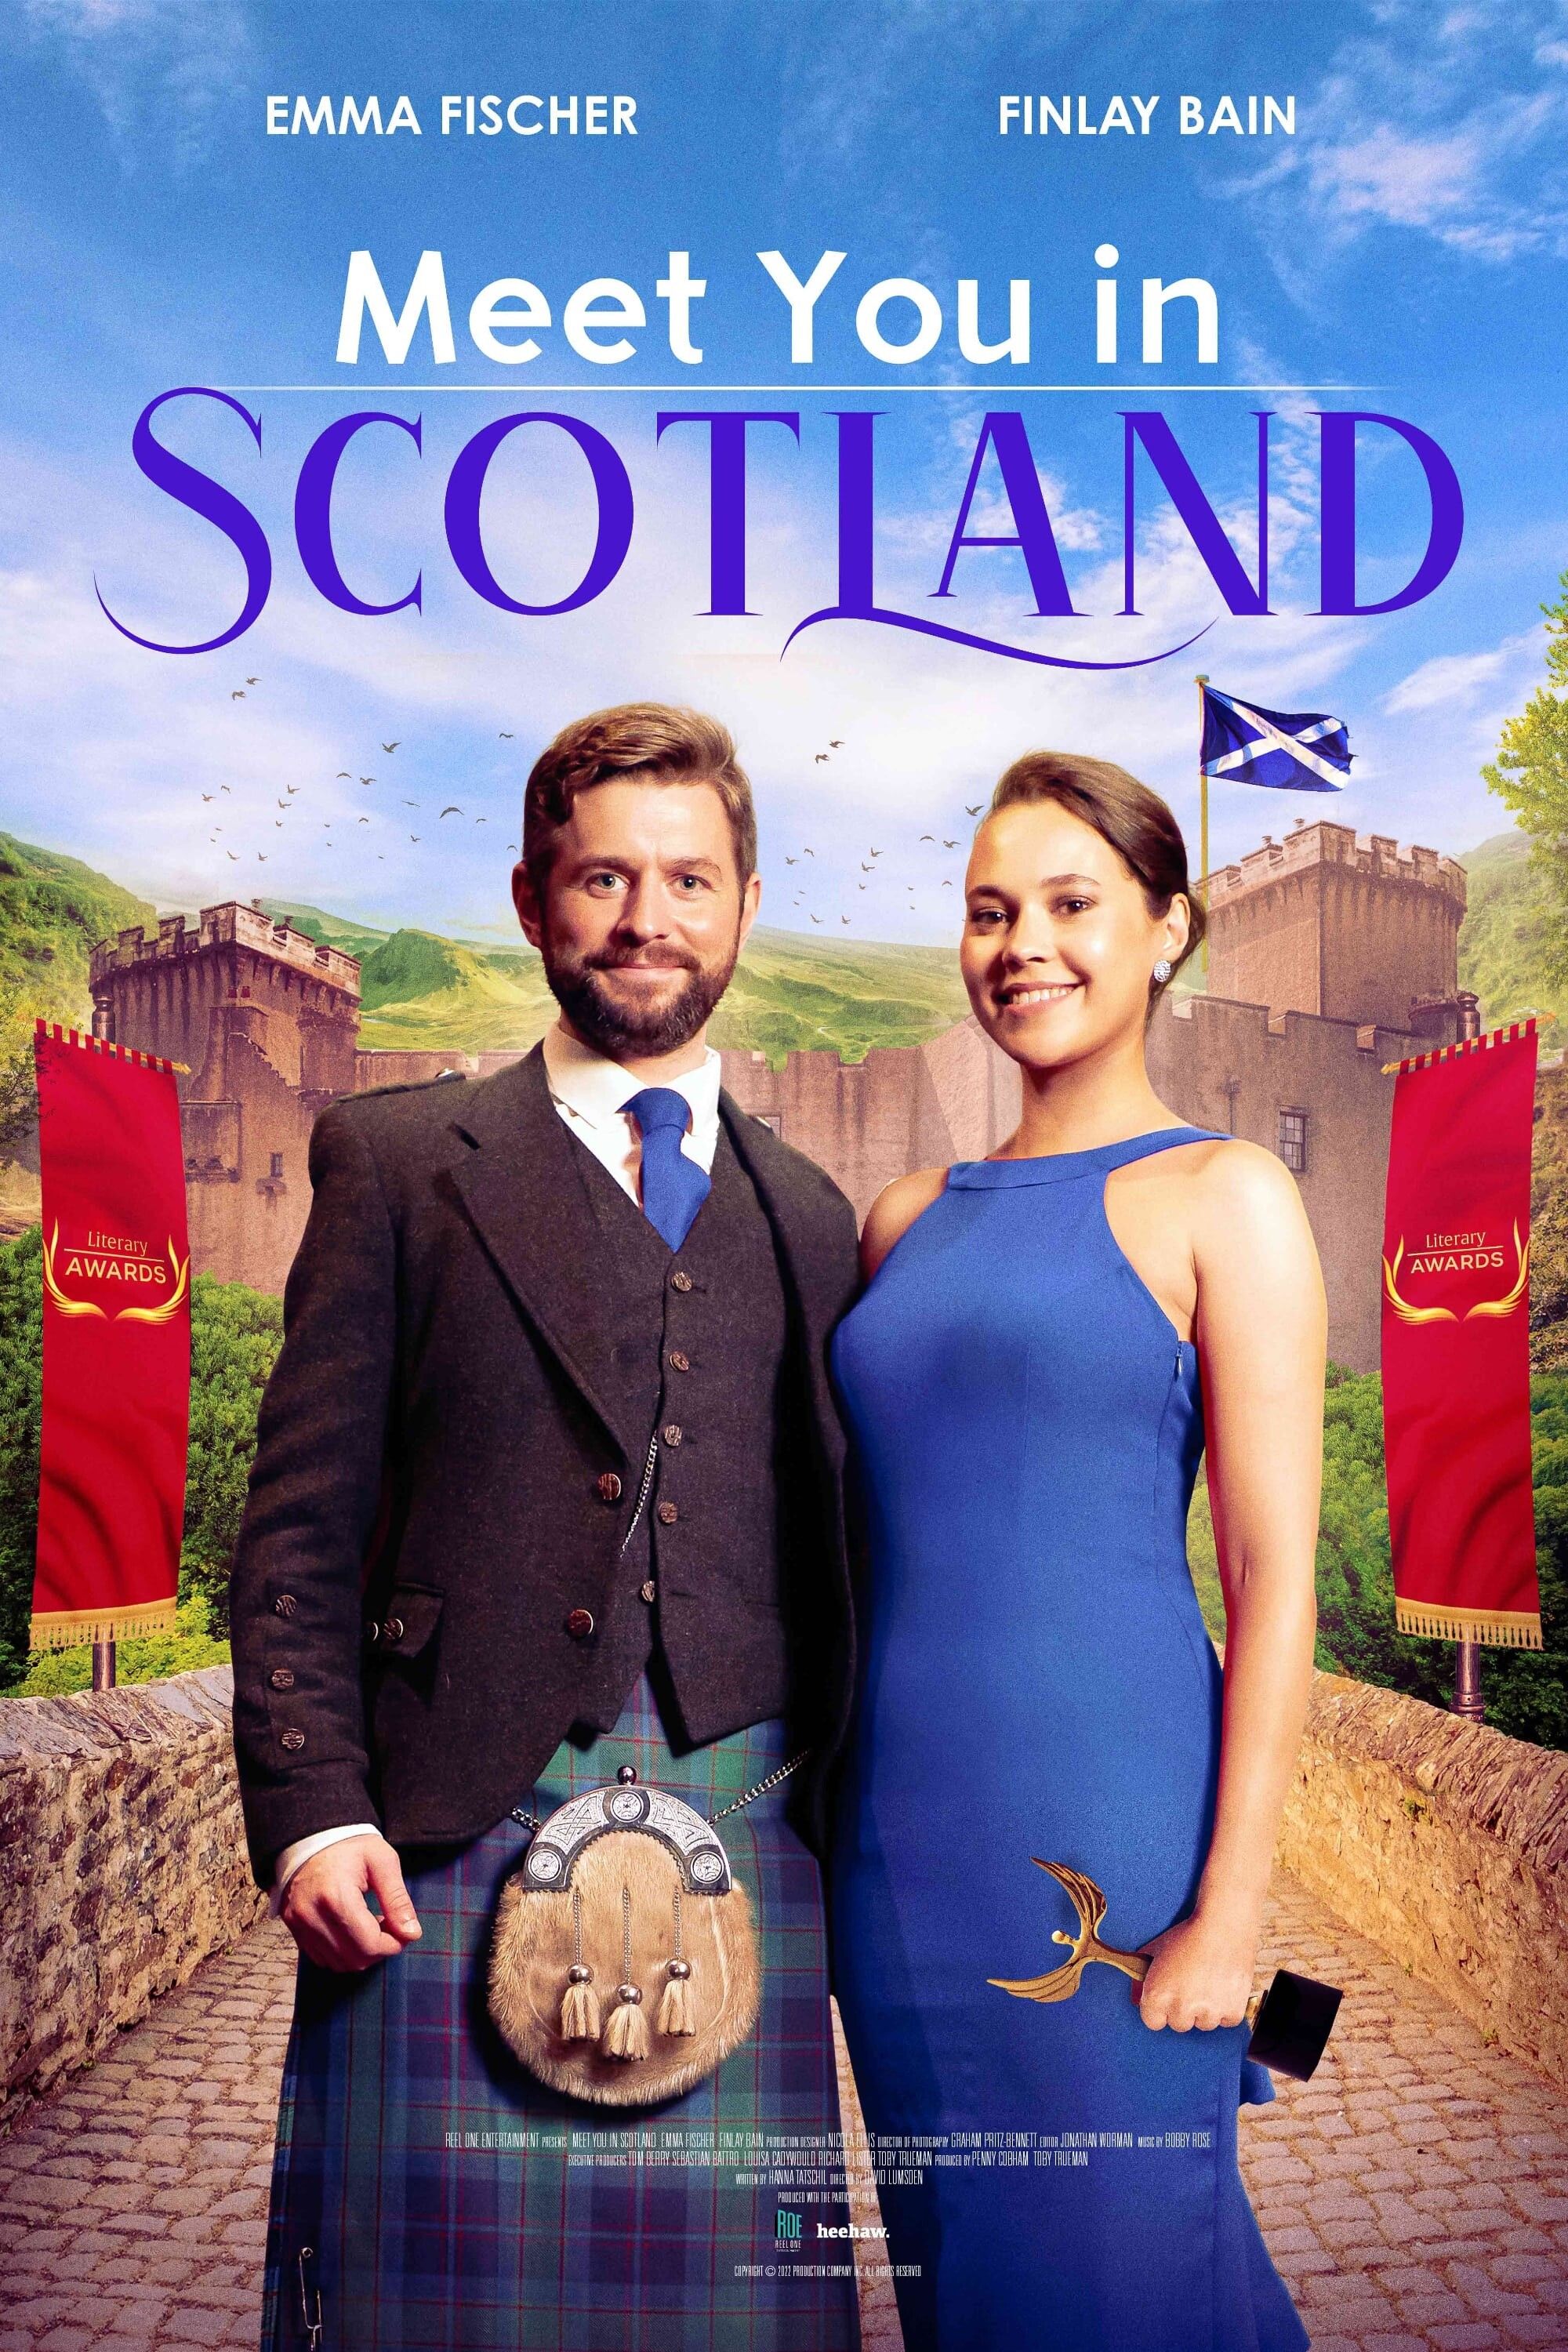 Meet You in Scotland Movie Information & Trailers